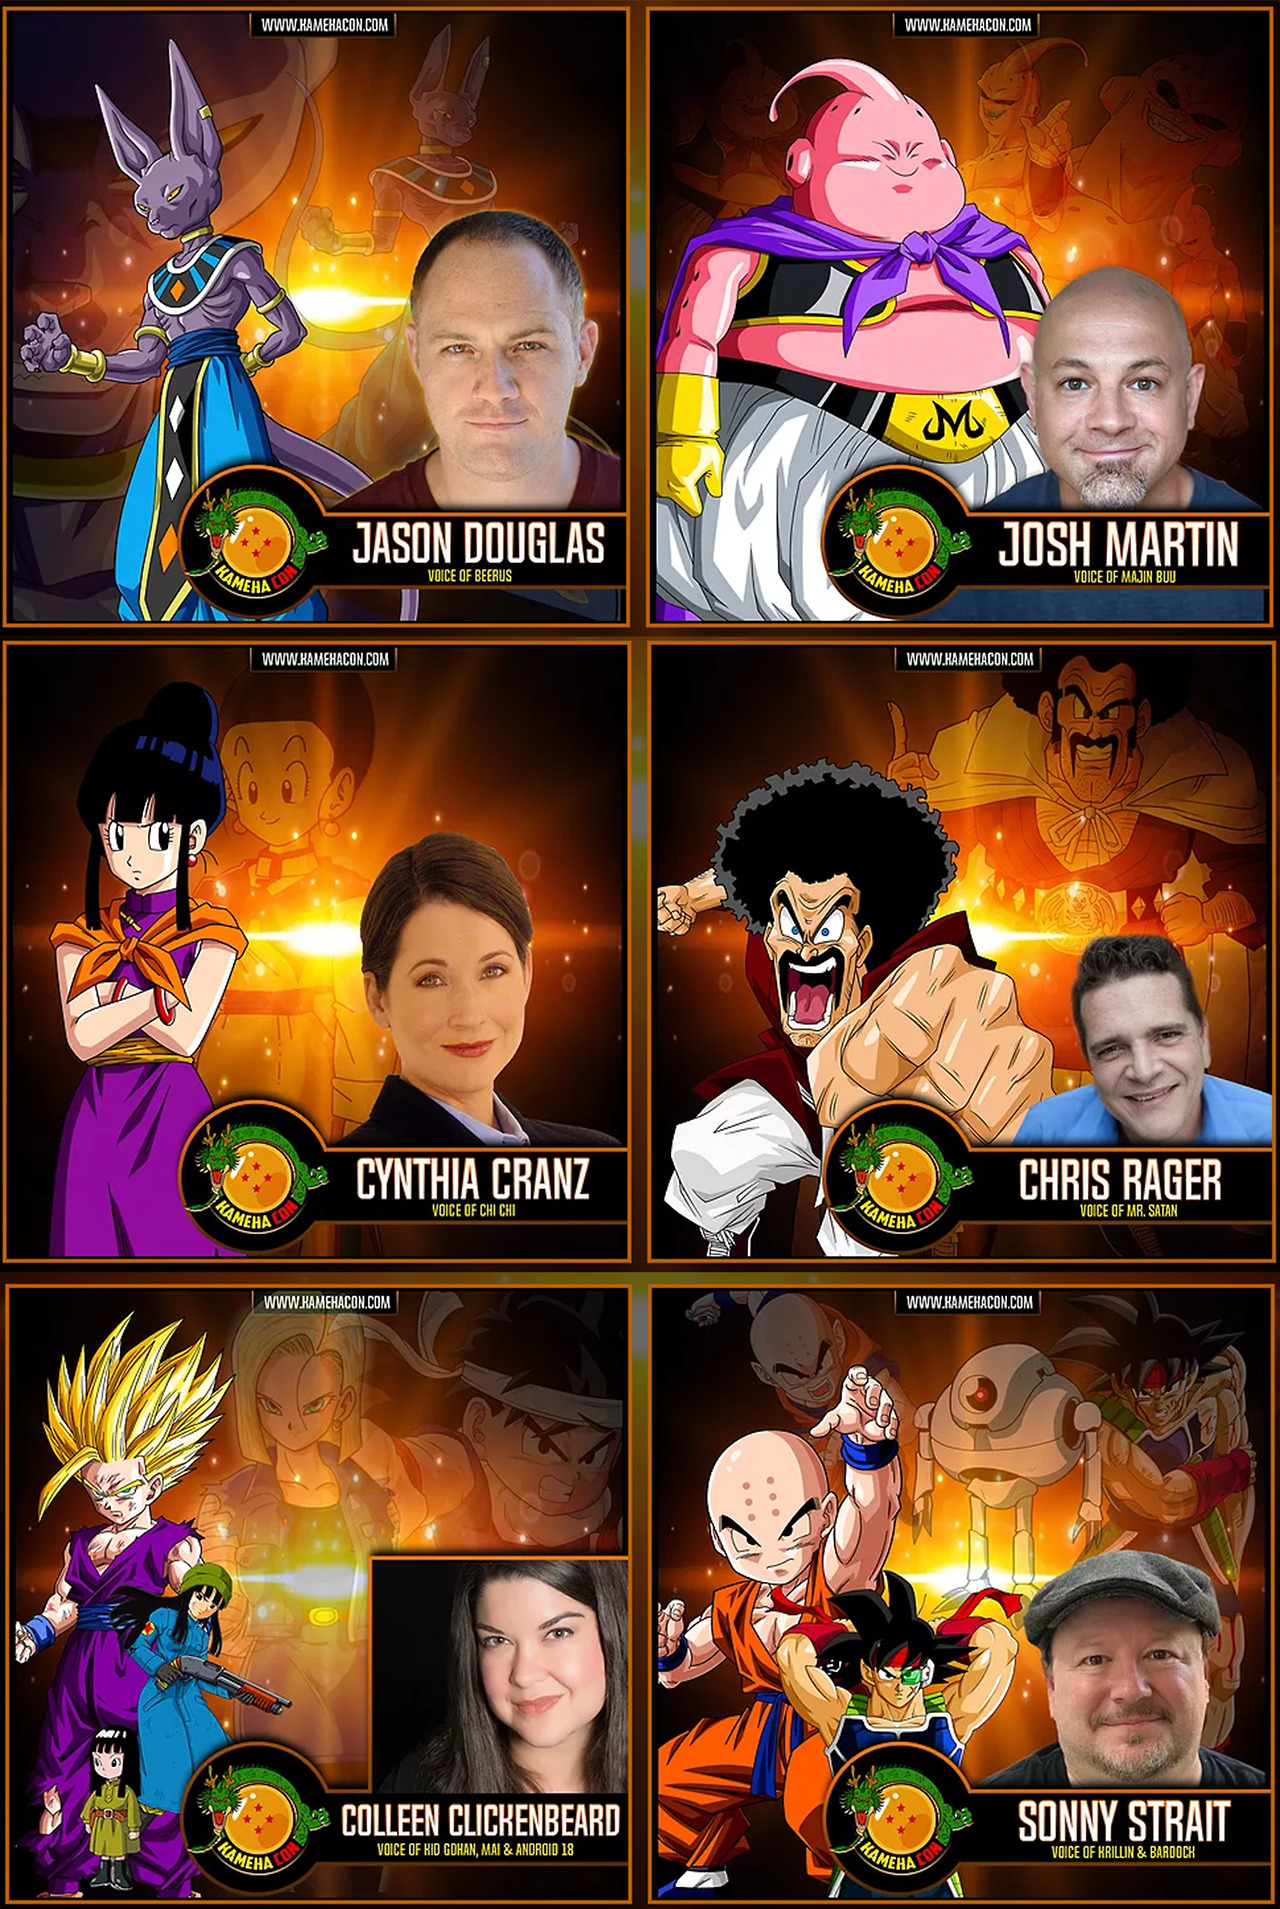 msdbzbabe: Next year May 4th - 6th 2018 is the first ever Dragon Ball Convention: